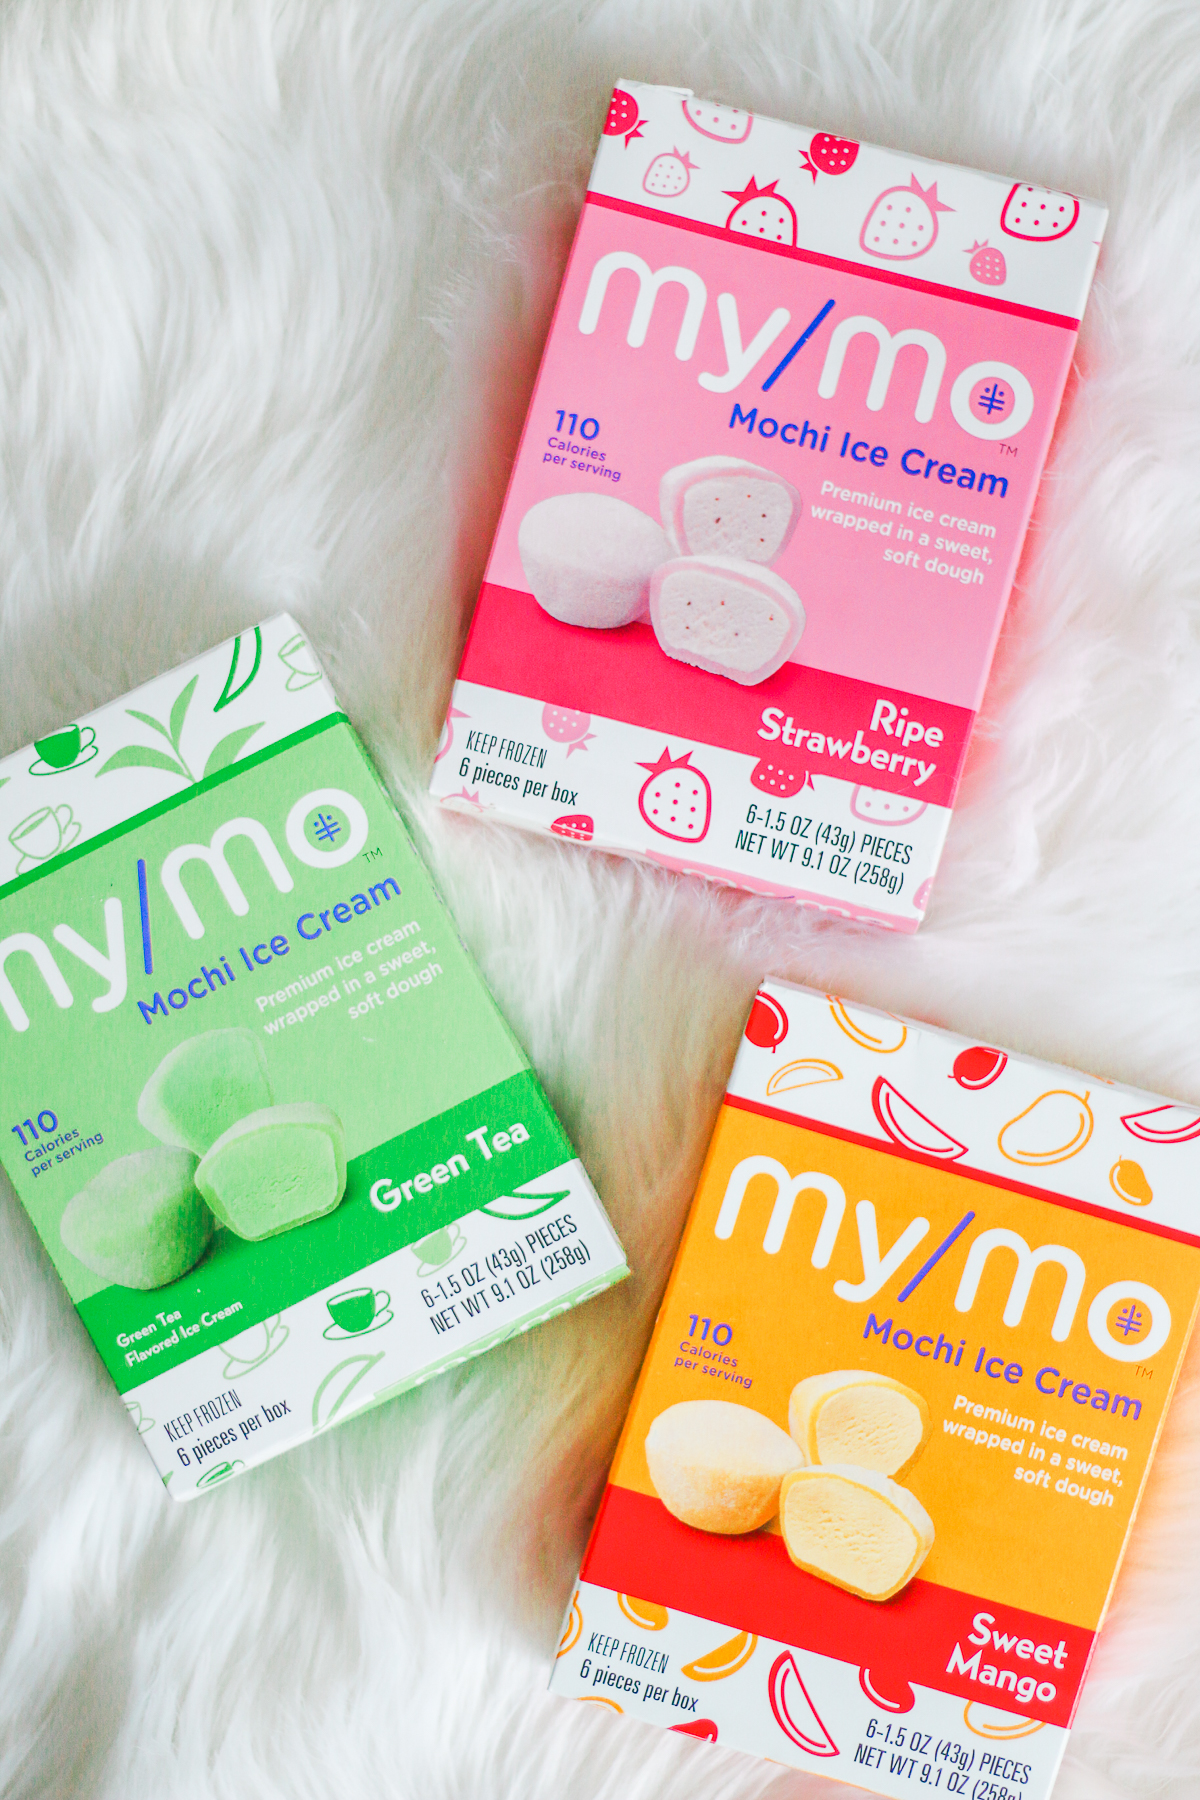 Summer Snacking: Where to Find the Best Mochi (And All the Best Mochi Flavors) by blogger Stephanie Ziajka from Diary of a Debutante, Lilly Pulitzer cold shoulder top with Cult Gaia dupe bag, Levi's 501 jean shorts, and Kendra Scott tassel earrings